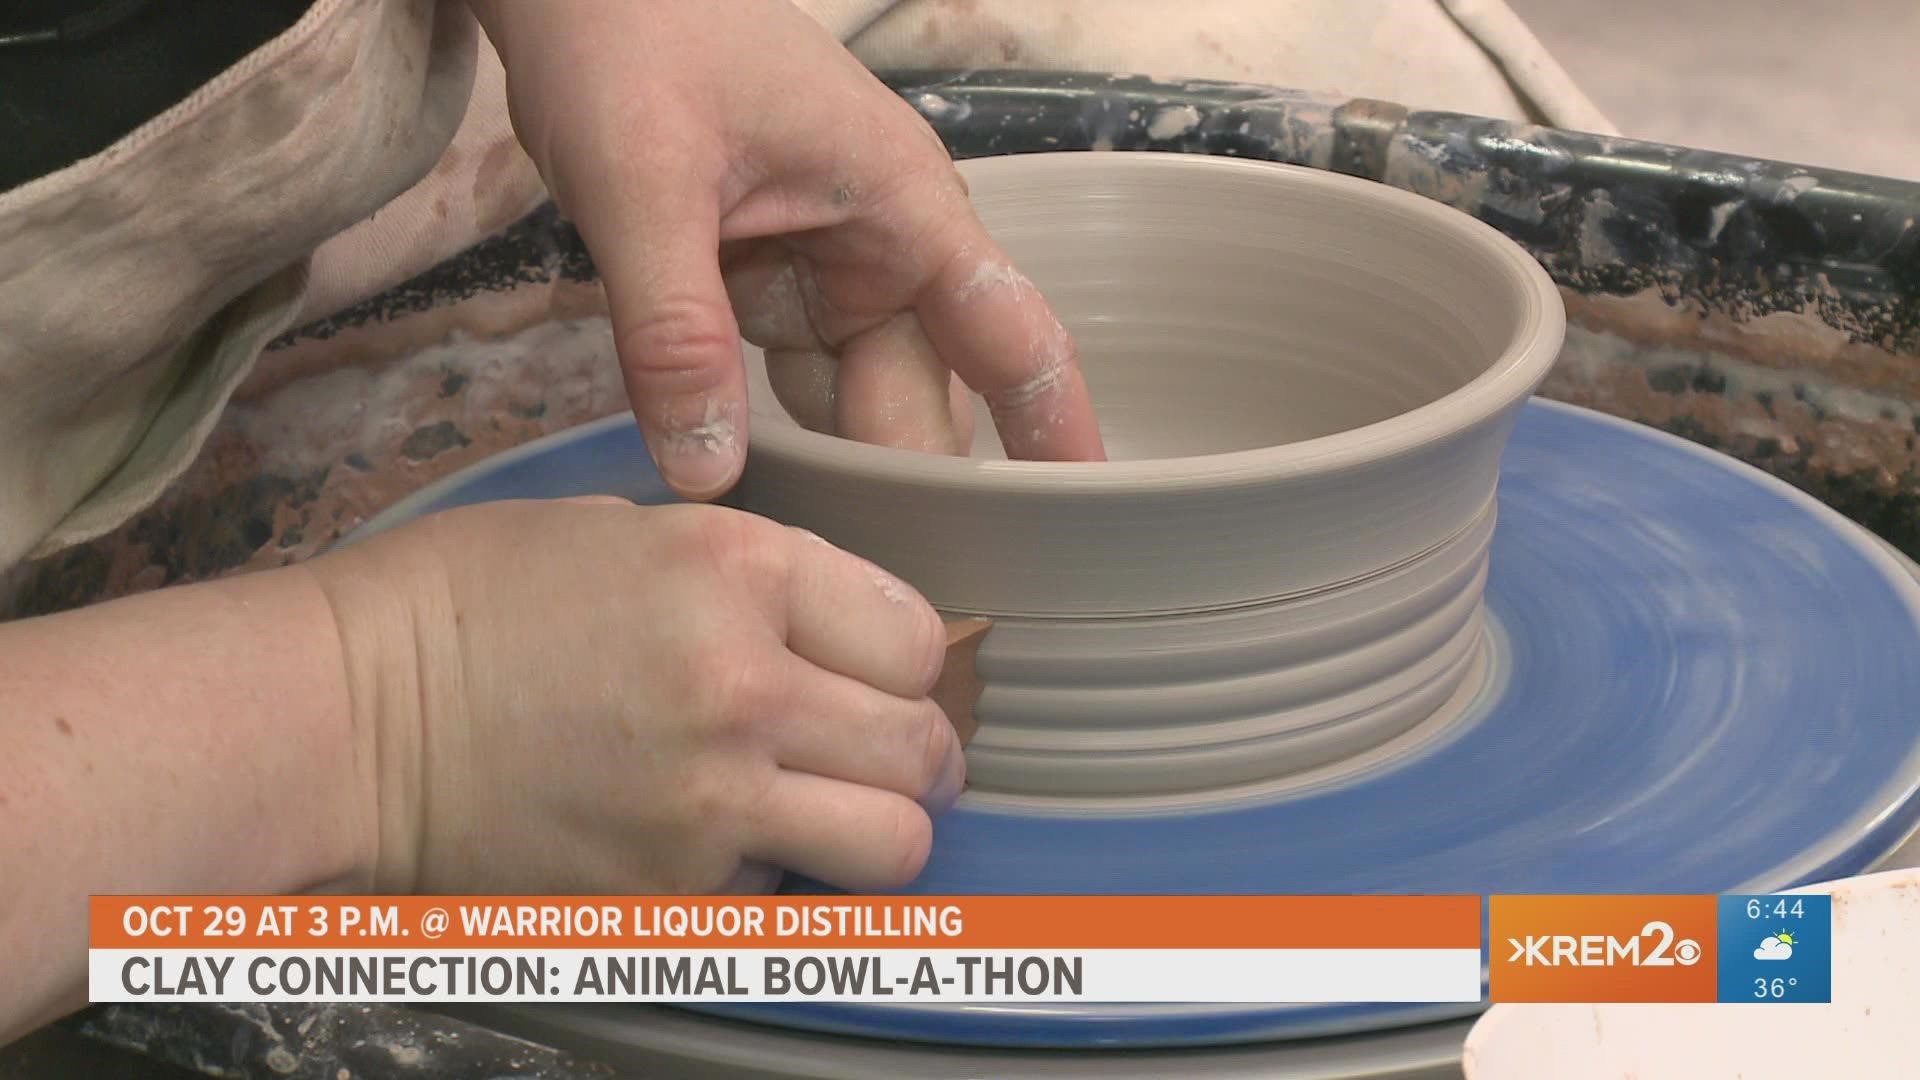 Clay Connection is hosting an Animal Bowl-A-Thon to raise money and help the community.